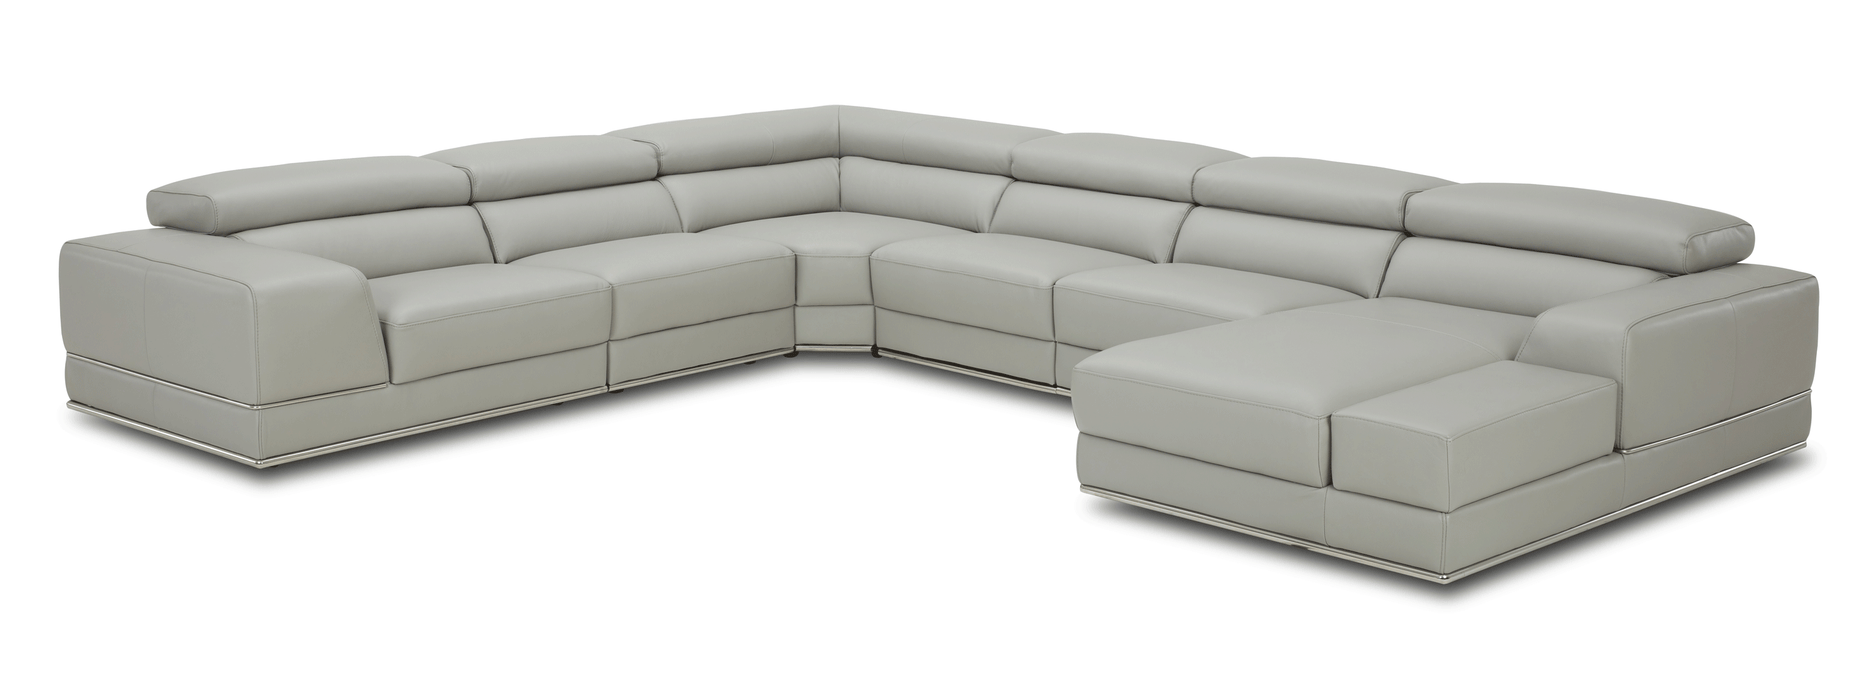 1576 Sectional Right By Kuka - i29443 - Gate Furniture